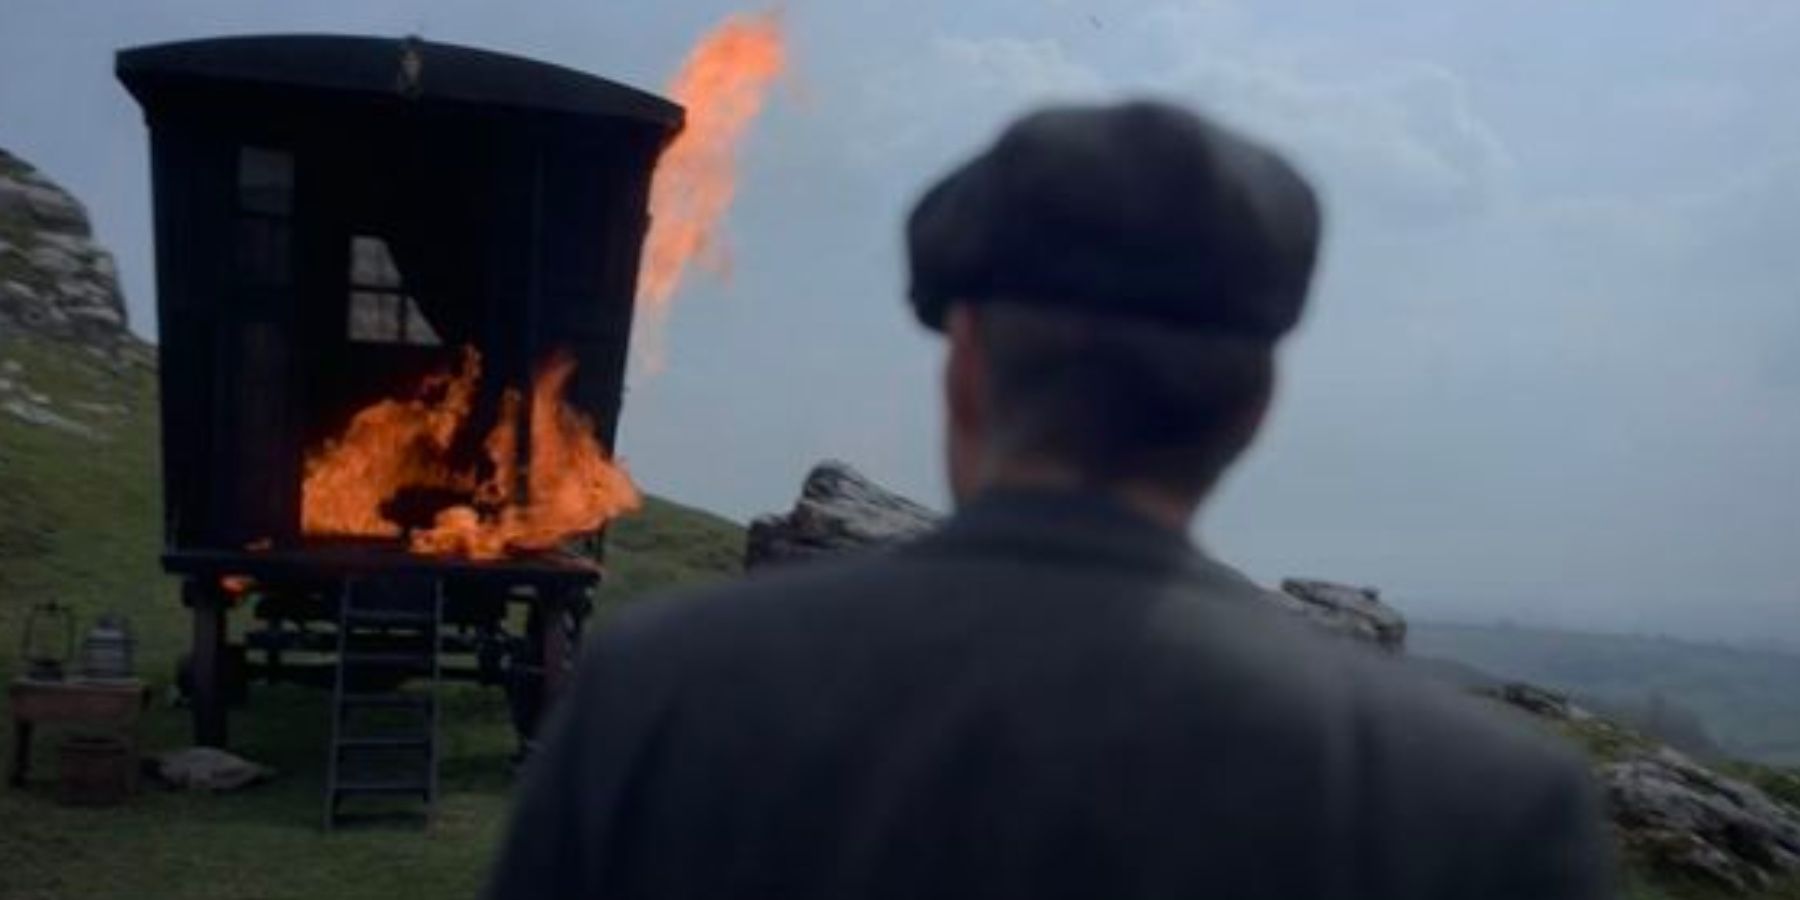 Cillian Murphy as Tommy Shelby watching his wagon burn in the Peaky Blinders season 6 finale.